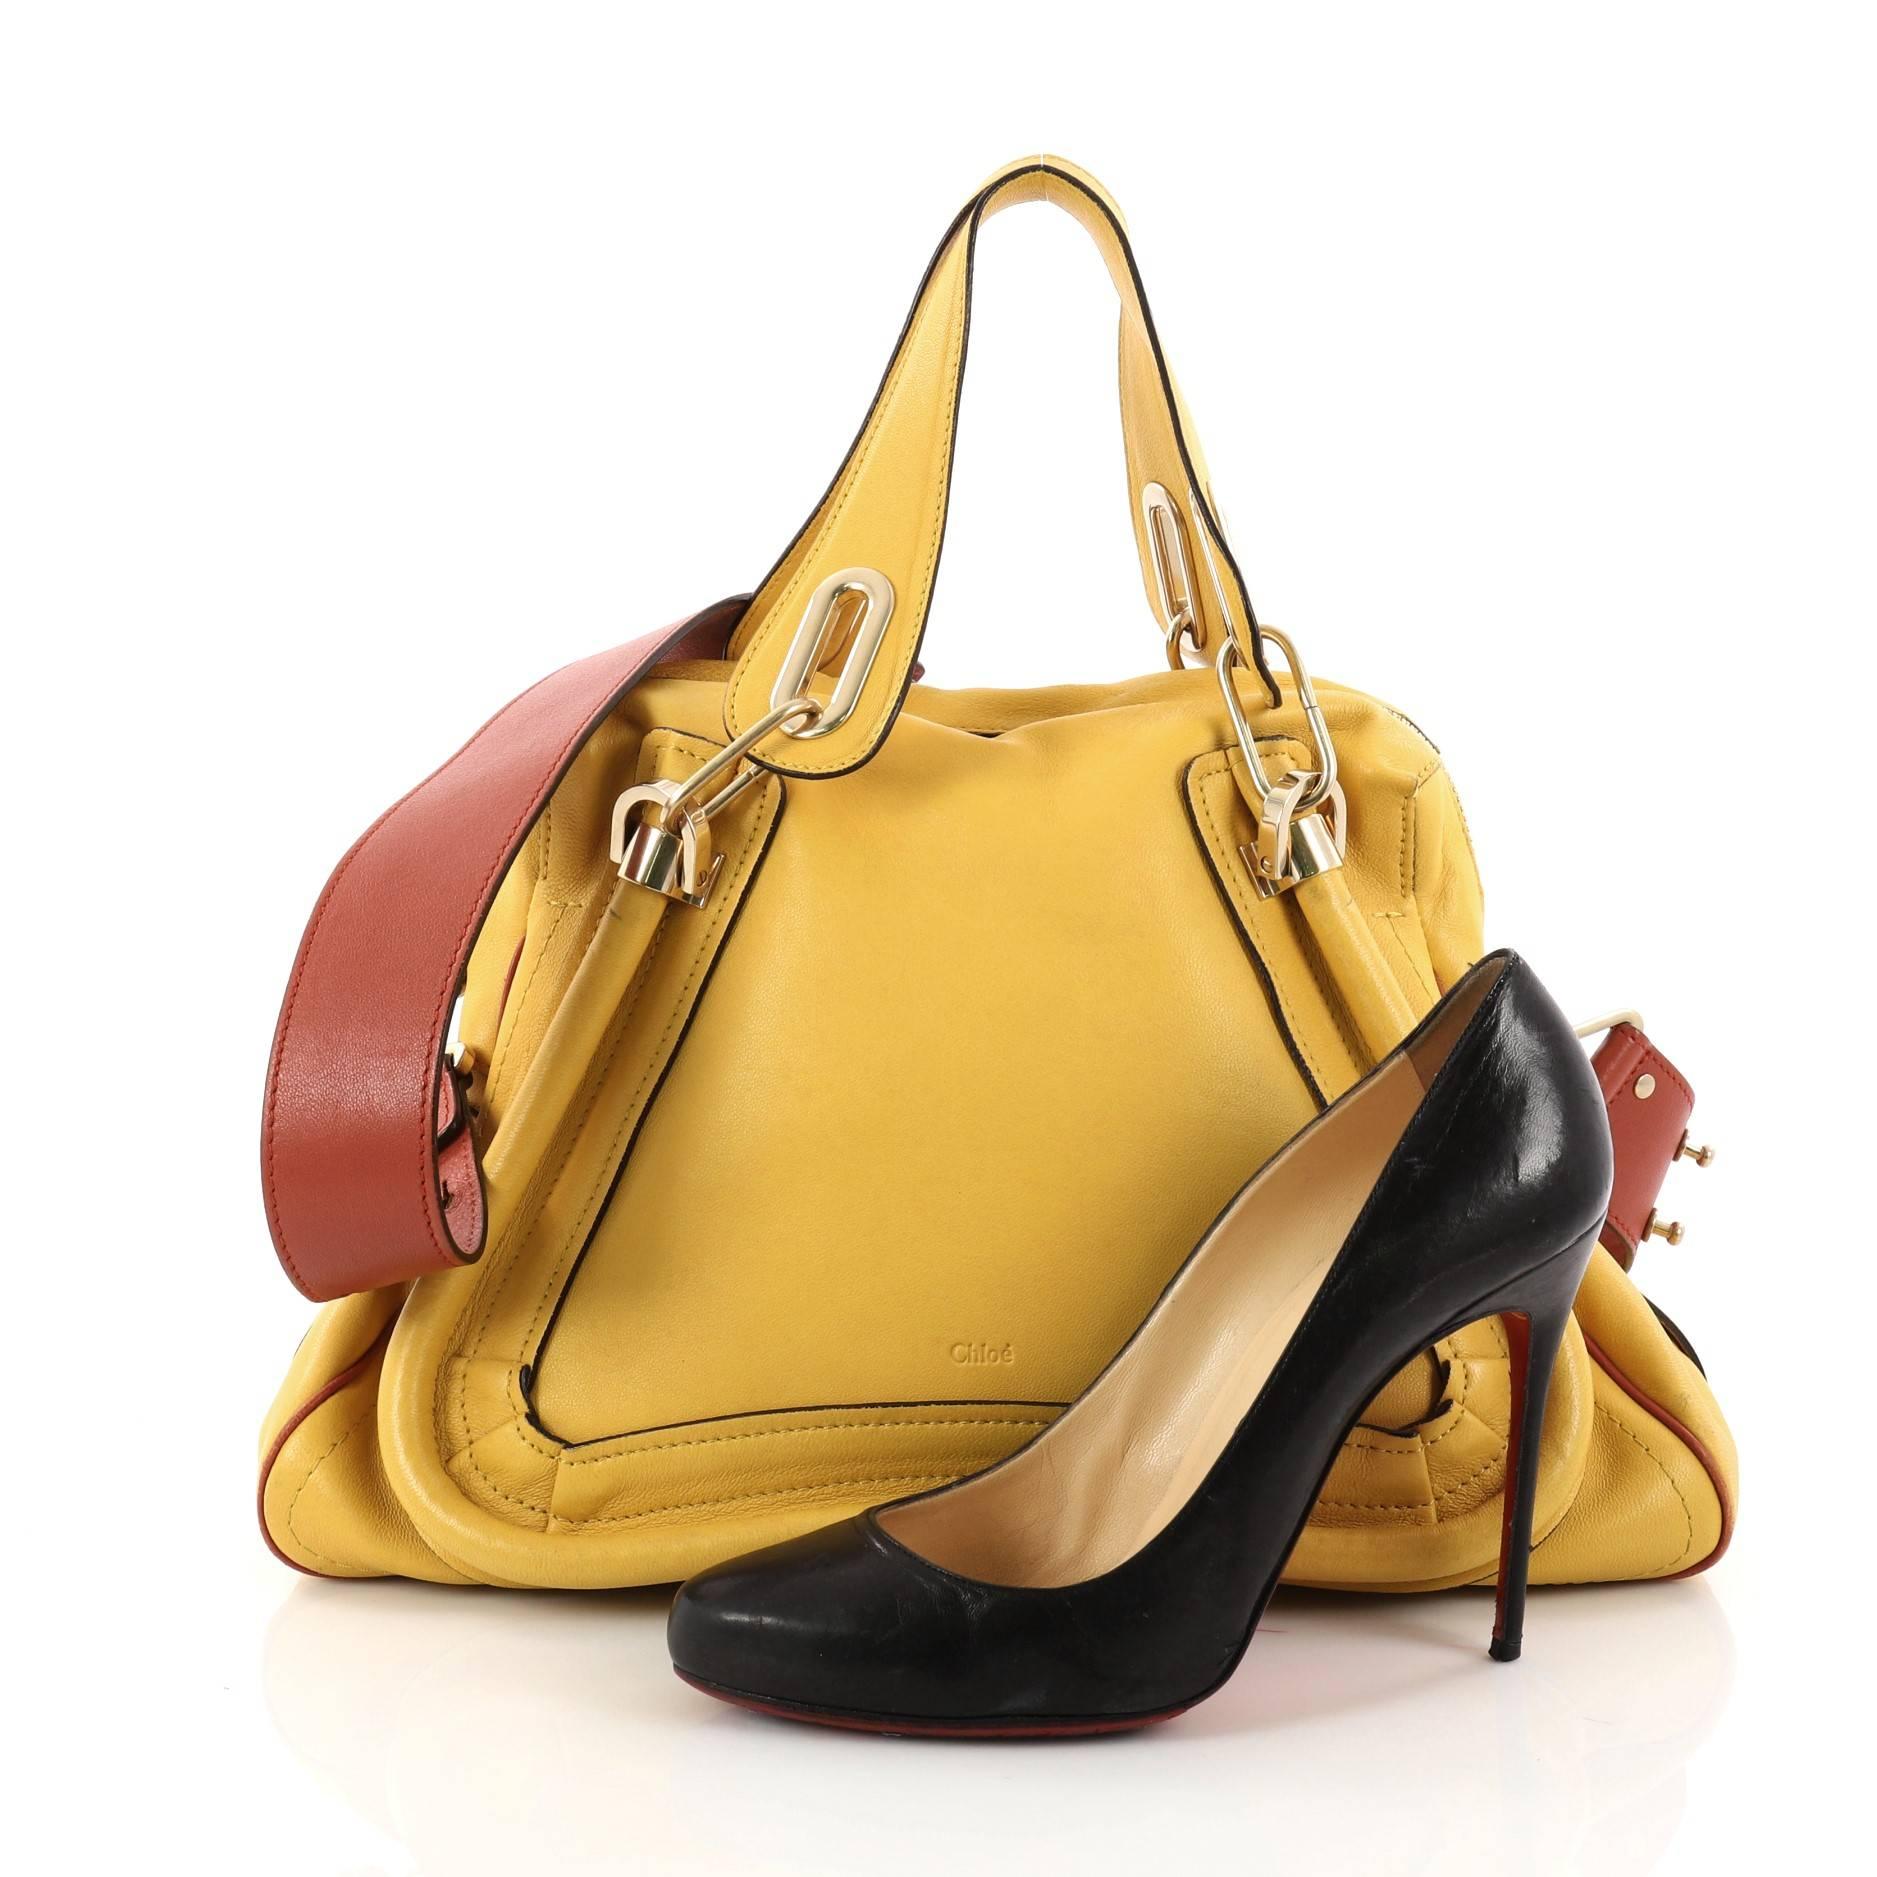 This authentic Chloe Paraty Top Handle Bag Leather Medium mixes style and functionality perfect for the modern woman. Crafted from yellow leather, this versatile satchel features piped trim details, dual handles, side twist locks, and gold-tone